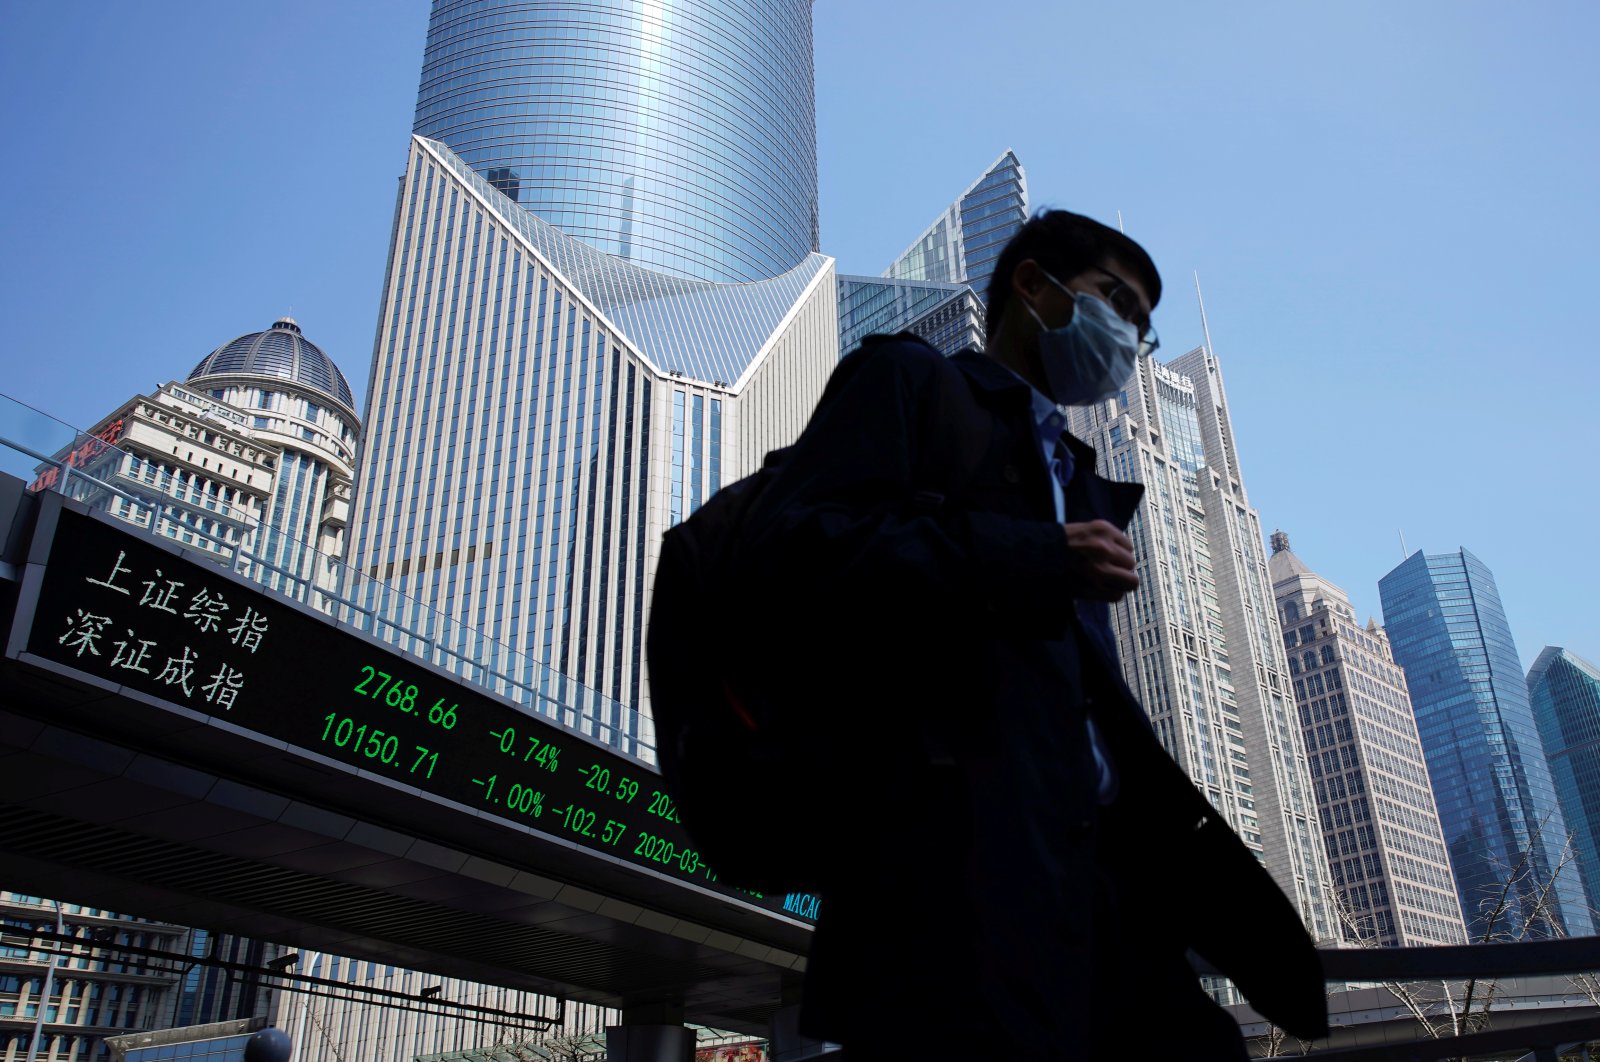 A pedestrian wearing a face mask walks near an overpass with an electronic board showing stock information, following an outbreak of the coronavirus disease (COVID-19), at Lujiazui financial district in Shanghai, China, Tuesday, March 17, 2020. (Reuters Photo)